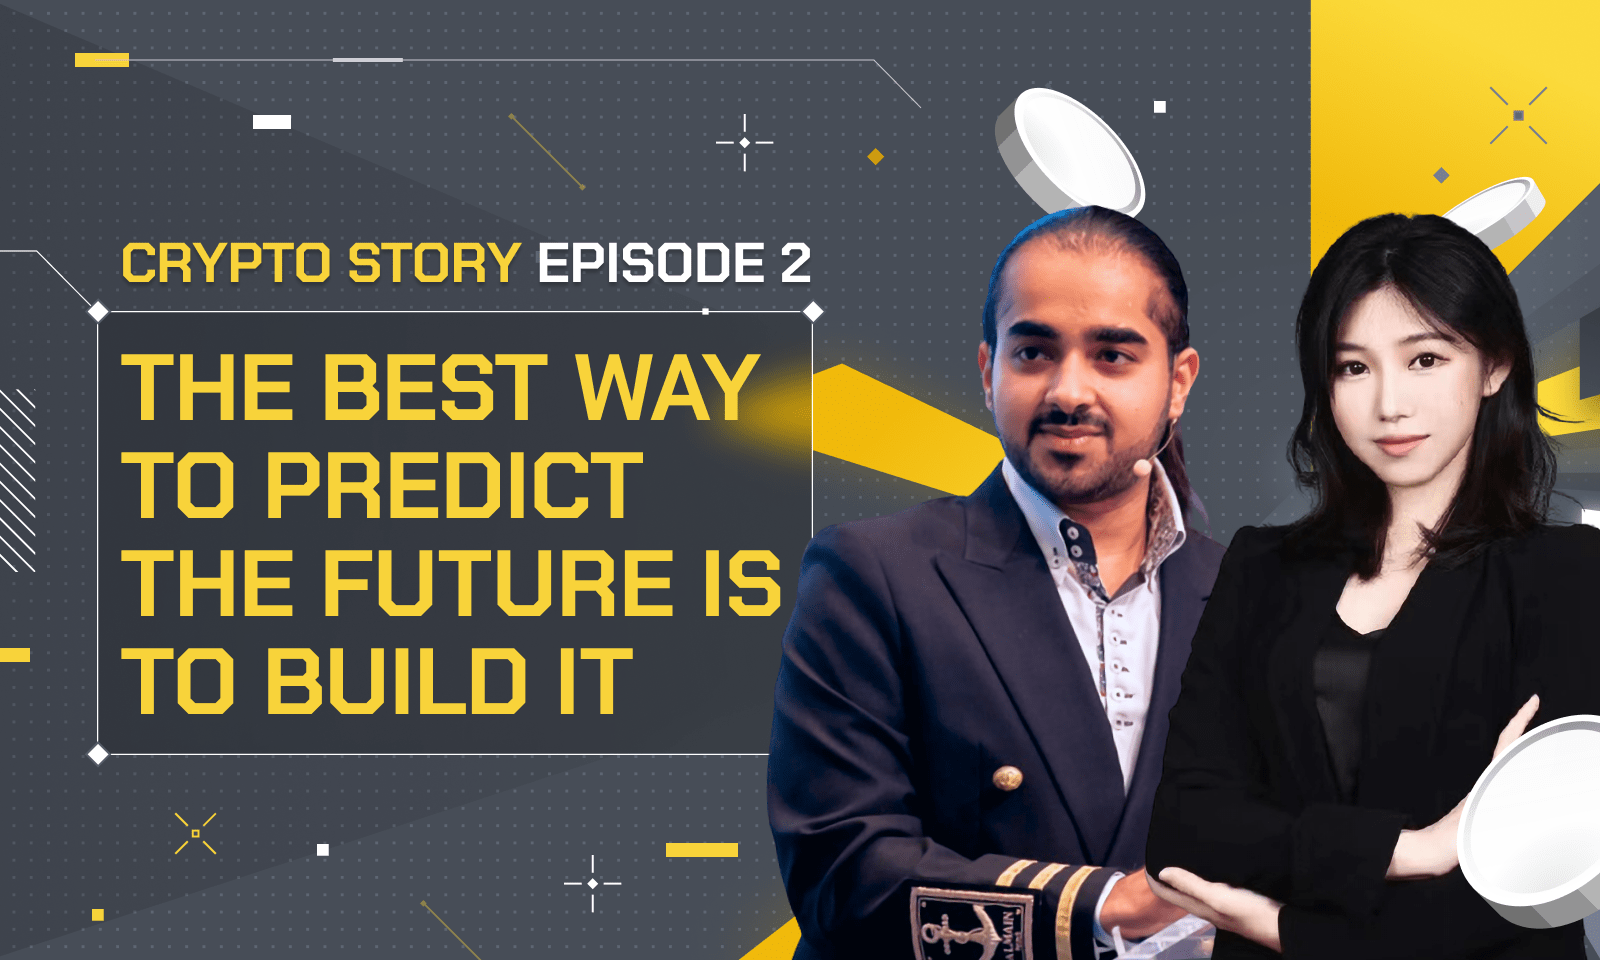 CryptoStory EP2: The best way to predict future is to build it.